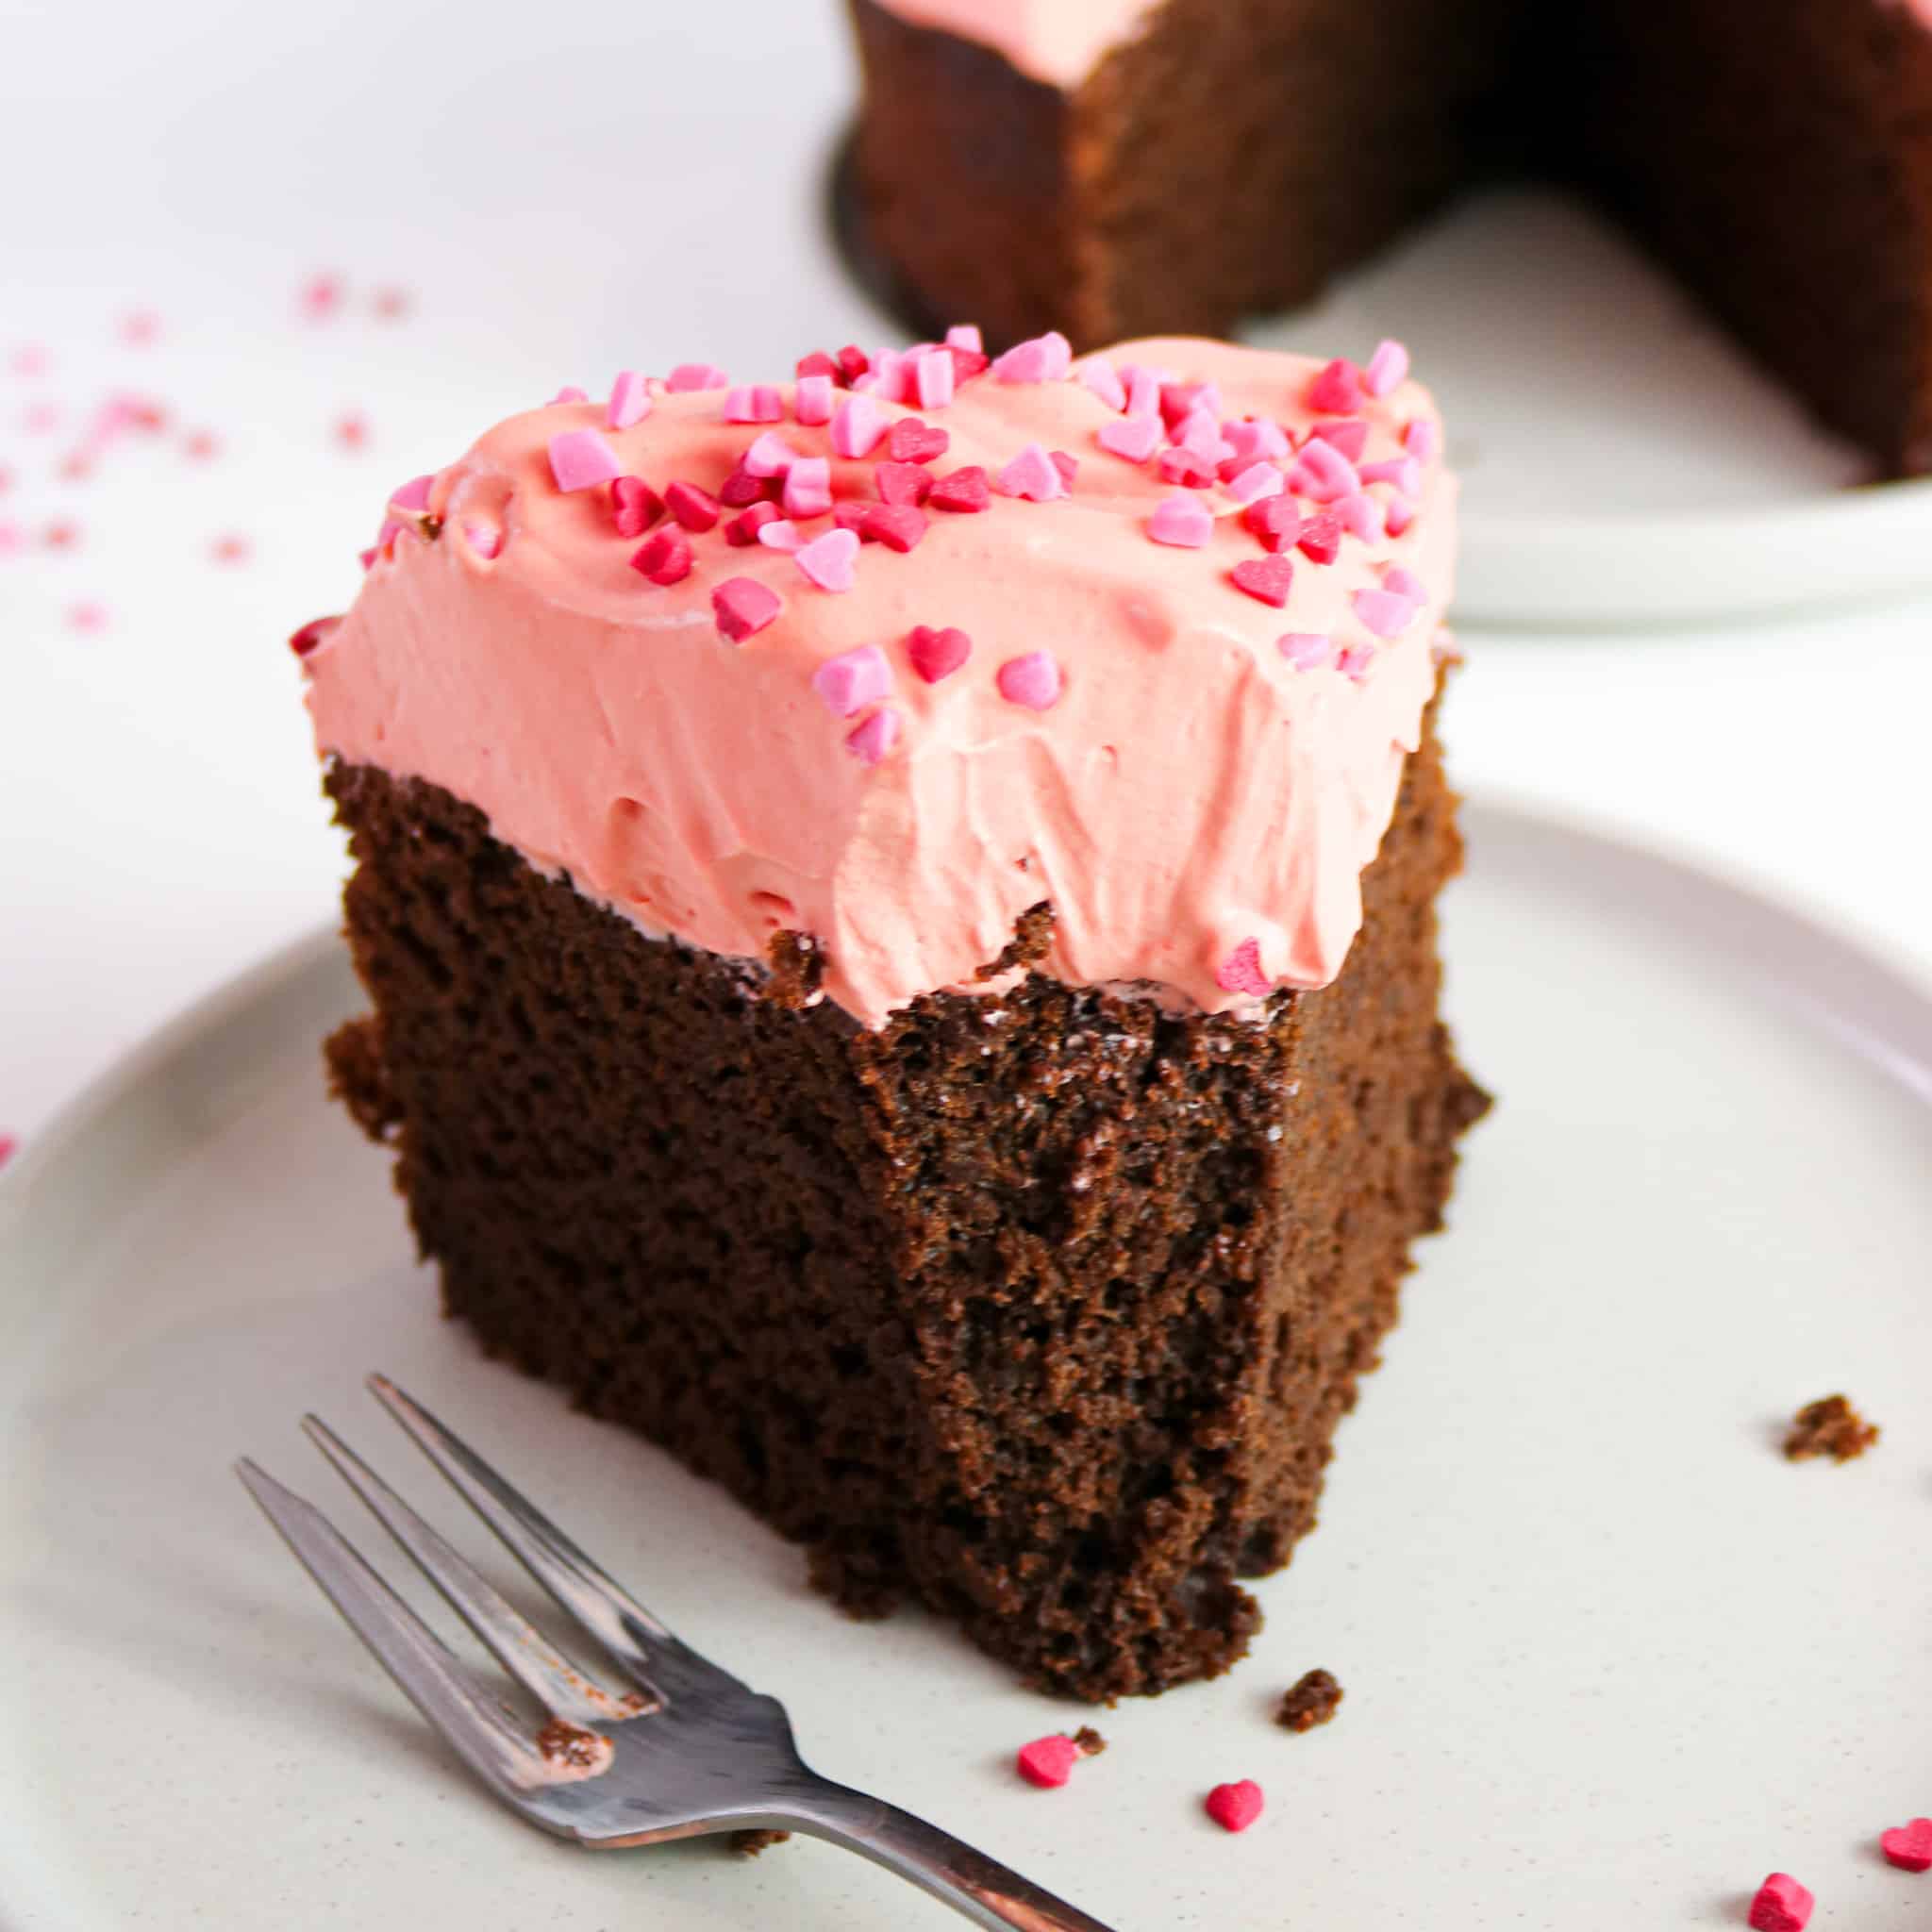 Gluten-free beetroot cake with chocolate drizzle | New Zealand Woman's  Weekly Food